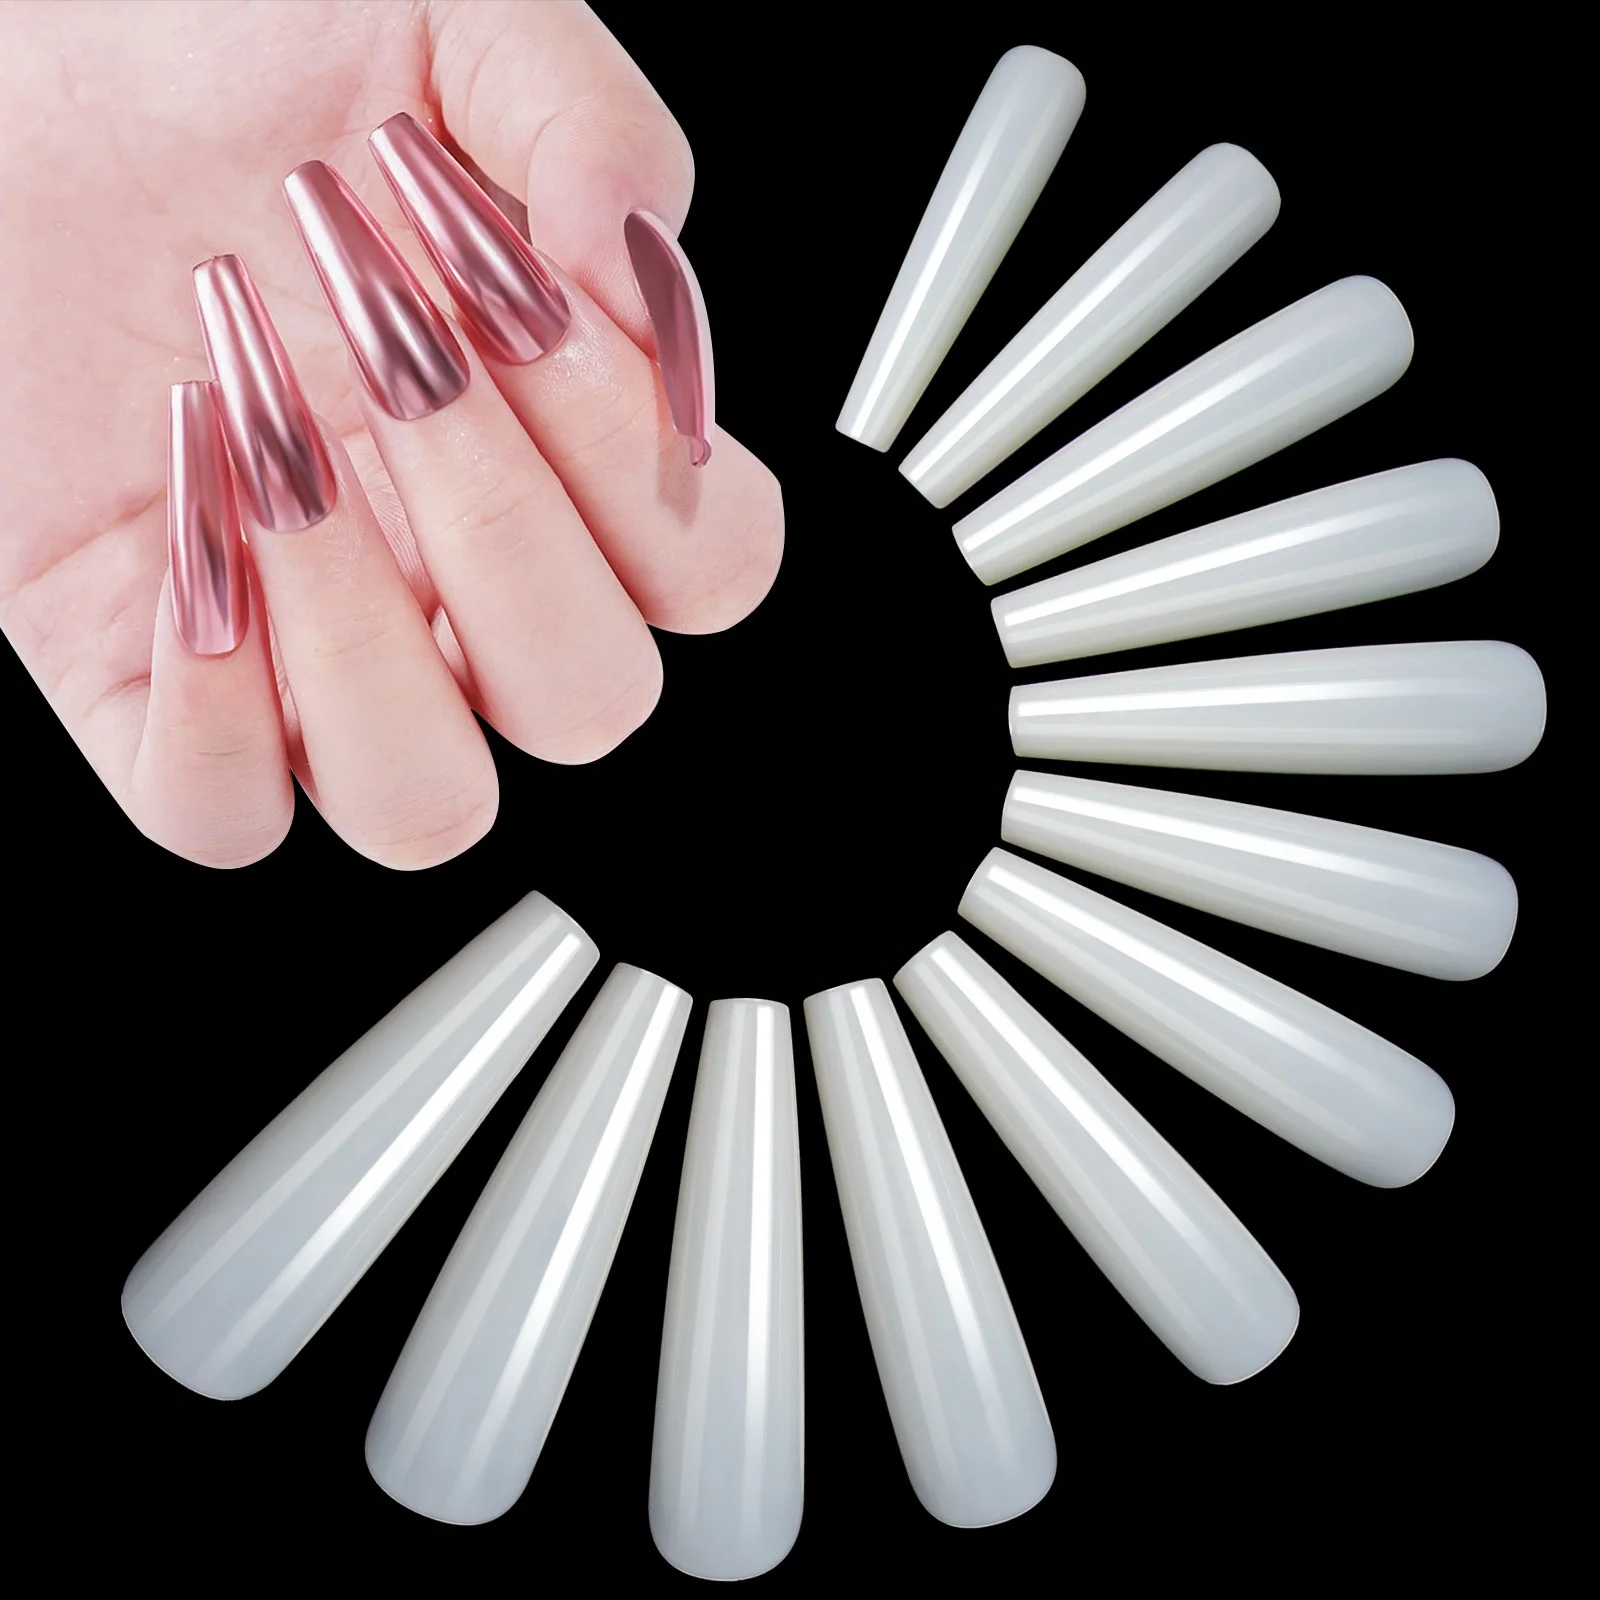 

240 Pcs XXL Long Straight Square Shape Tips for Acrylic False Nail with Box Extra Long C Curve Full Cover Nail Tips, Clear/natural